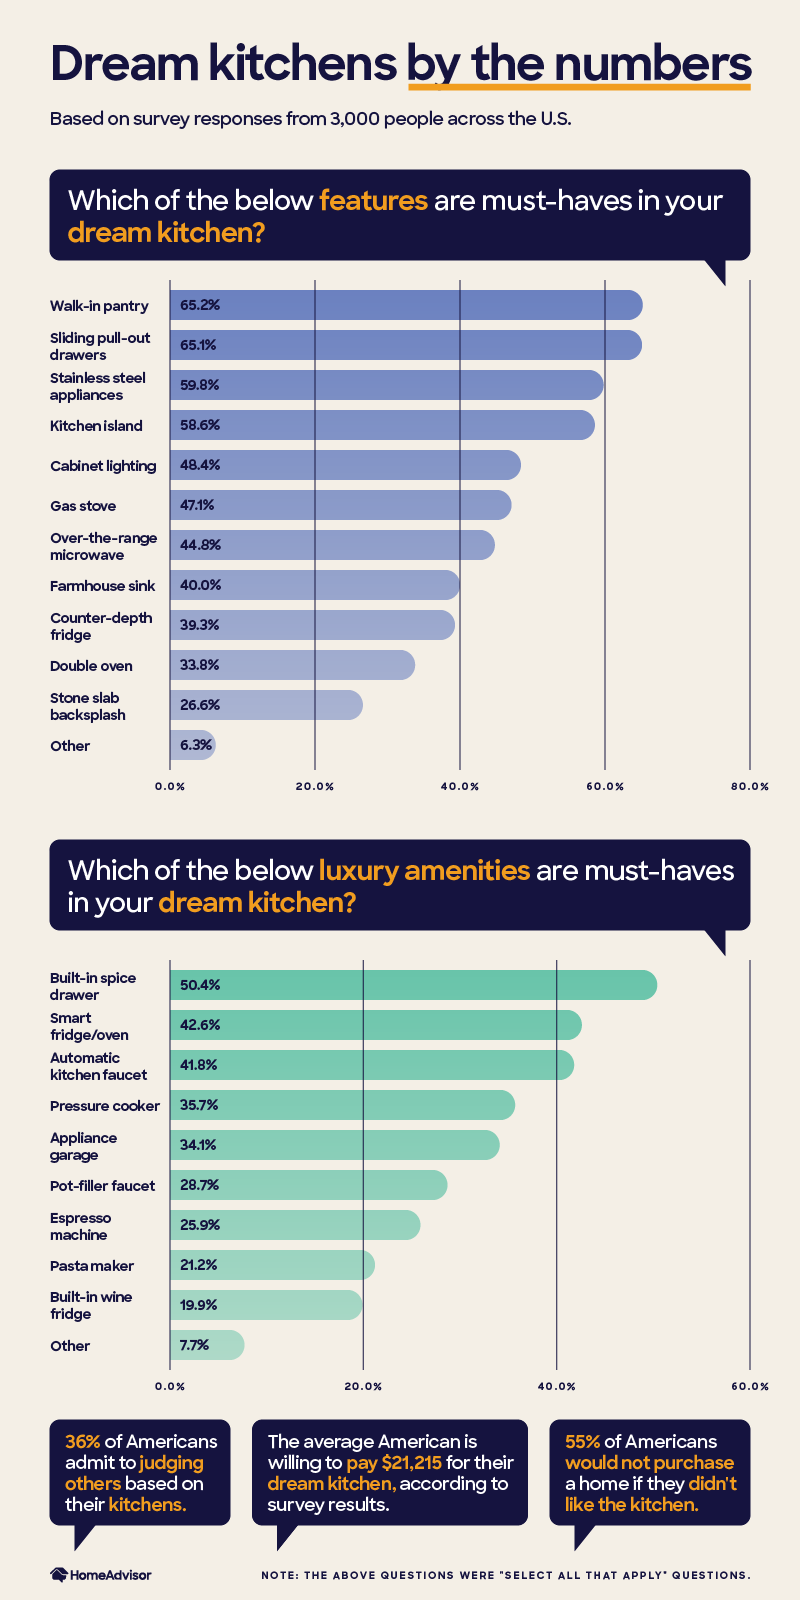 Bar graphs displaying must-have features and amenities in a dream kitchen